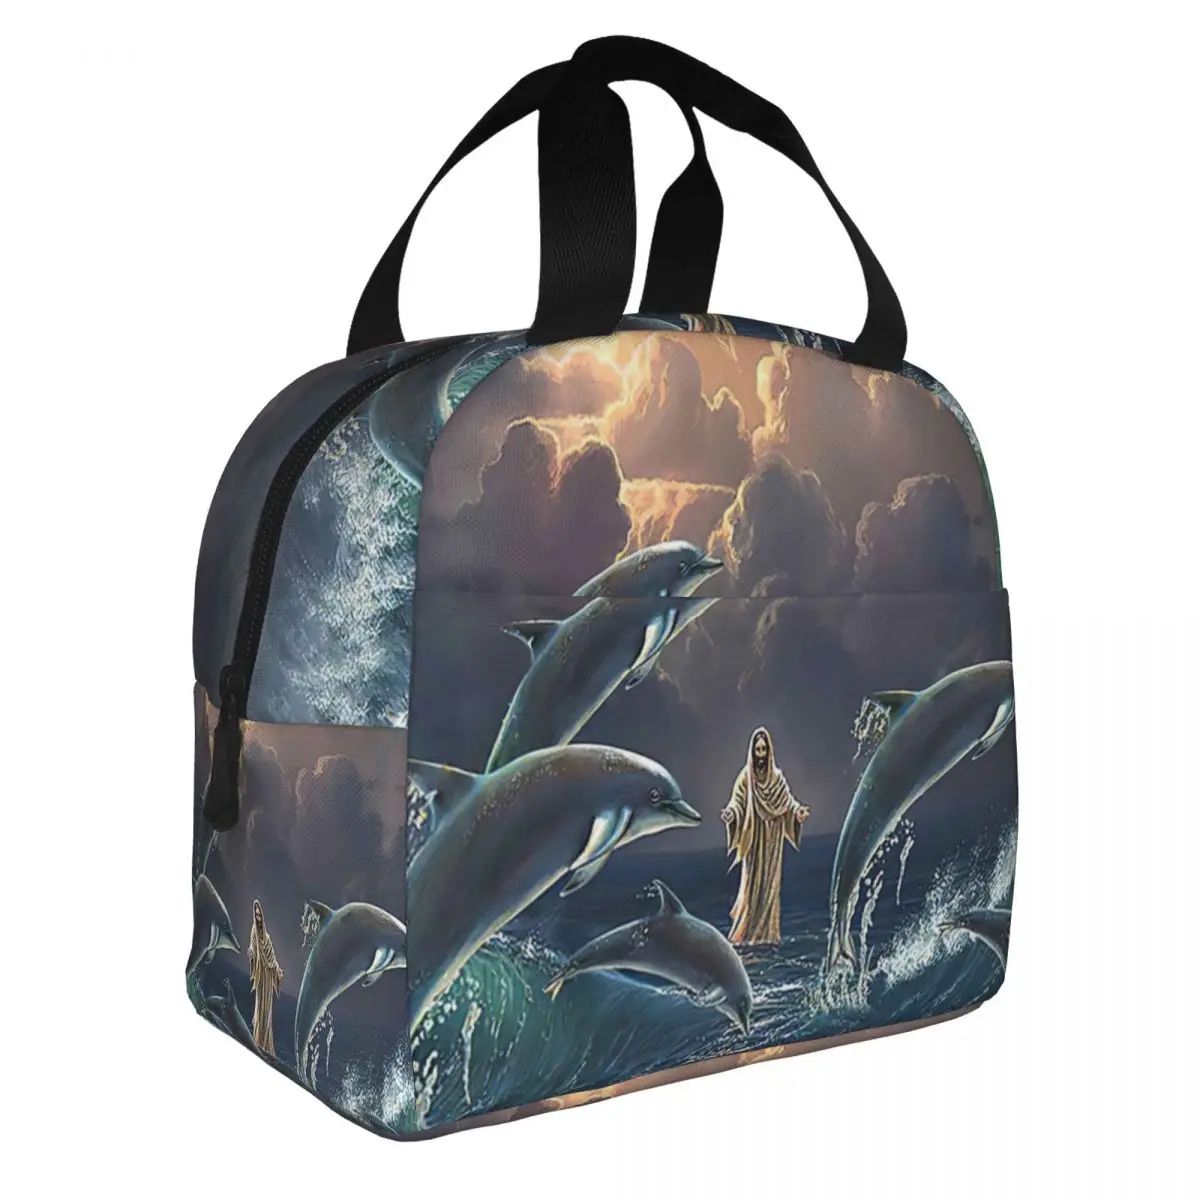 Jesu And Fish Canvas Poster Lunch Bento Bags Portable Aluminum Foil thickened Thermal Cloth Lunch Bag for Women Men Boy